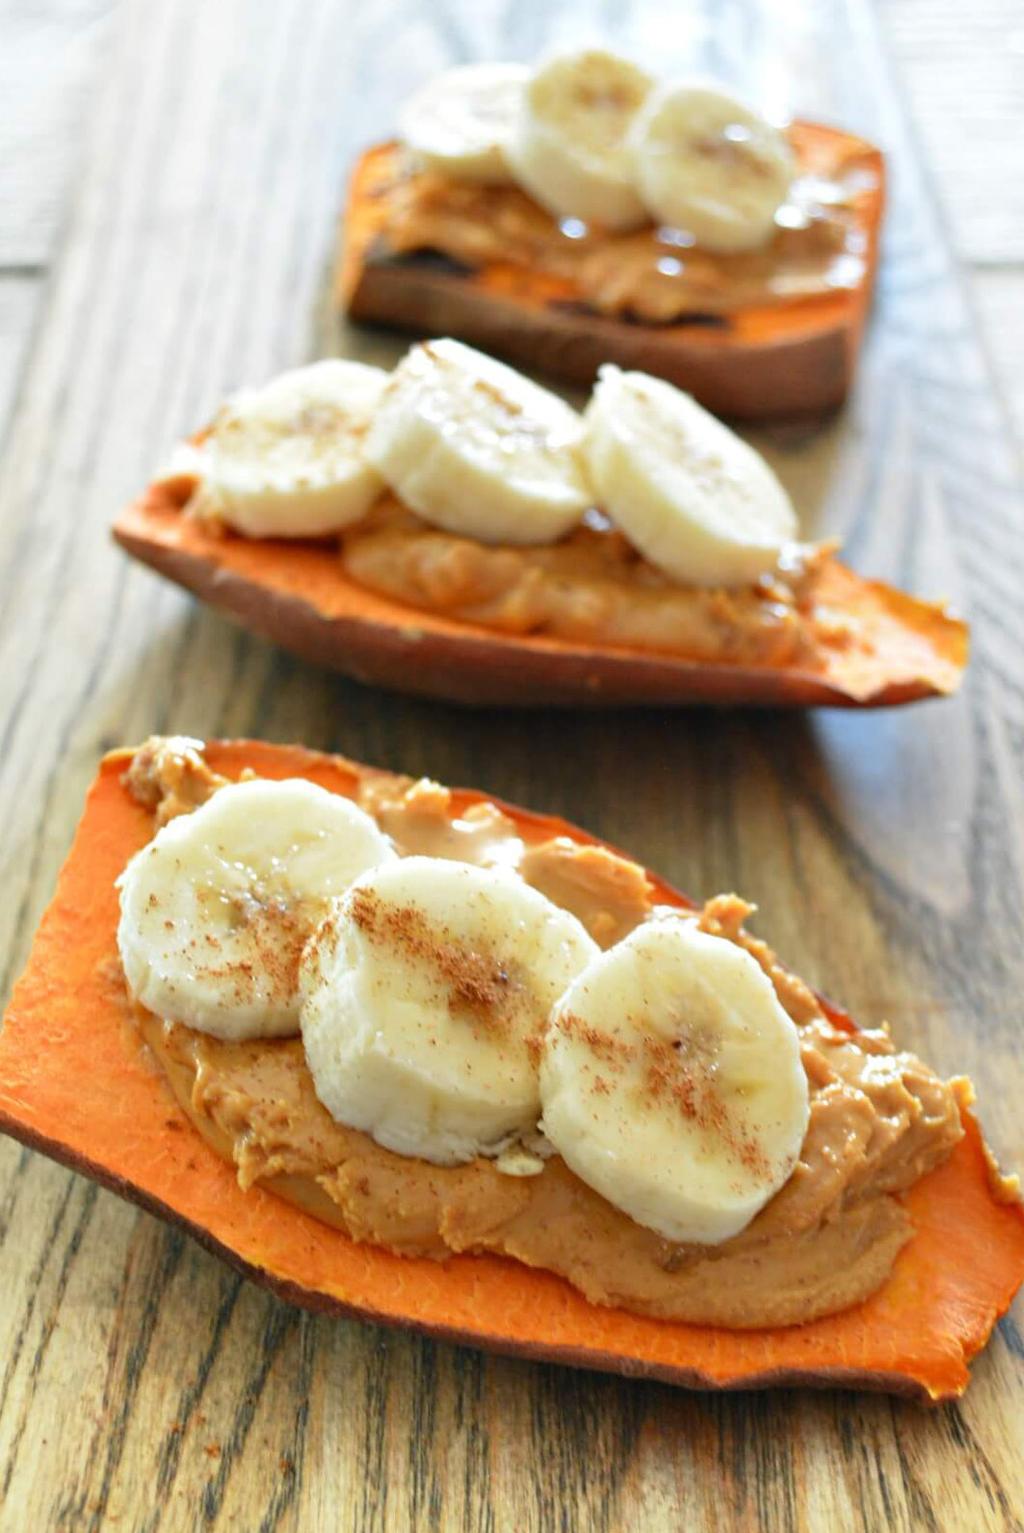 ALMOND BUTTER Banana Toast Prep Time: 10 minutes Cook Time: 5 minutes Serves: 4-8 1-2 sweet potatoes, ends cut off and sliced ¼-inch thick 4 T almond butter 1 ripe banana, sliced Cinnamon for